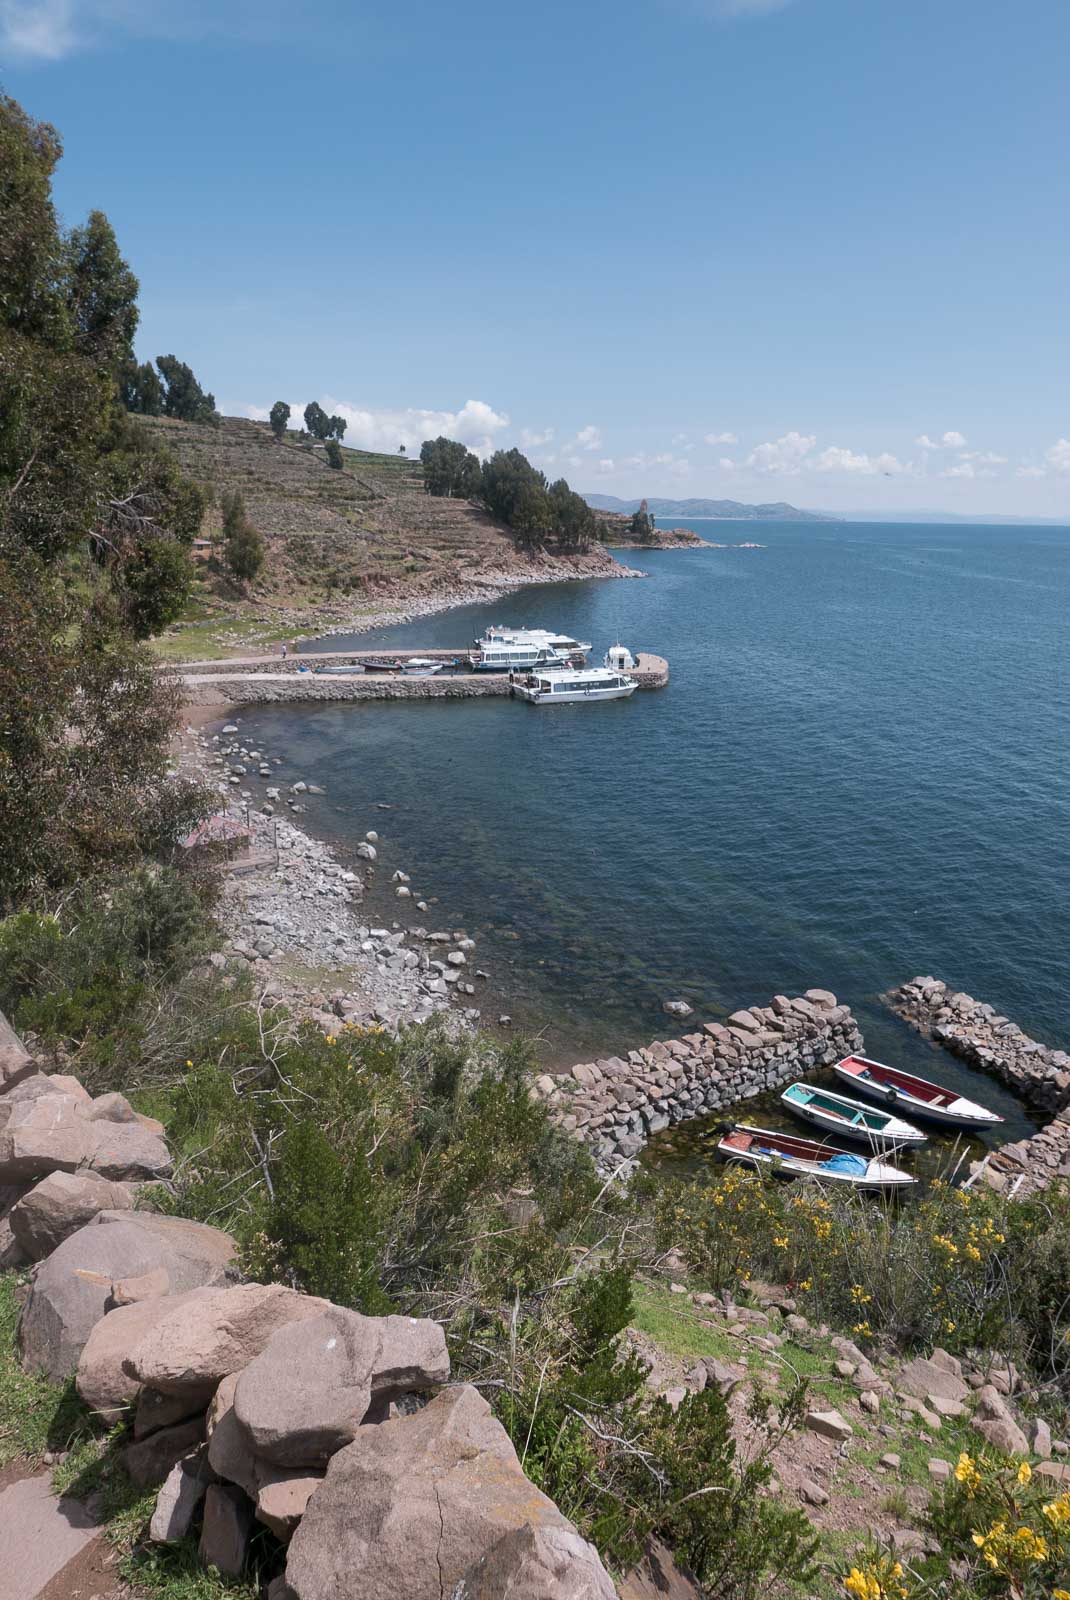 Views over Lake Titicaca from Taquile Island.